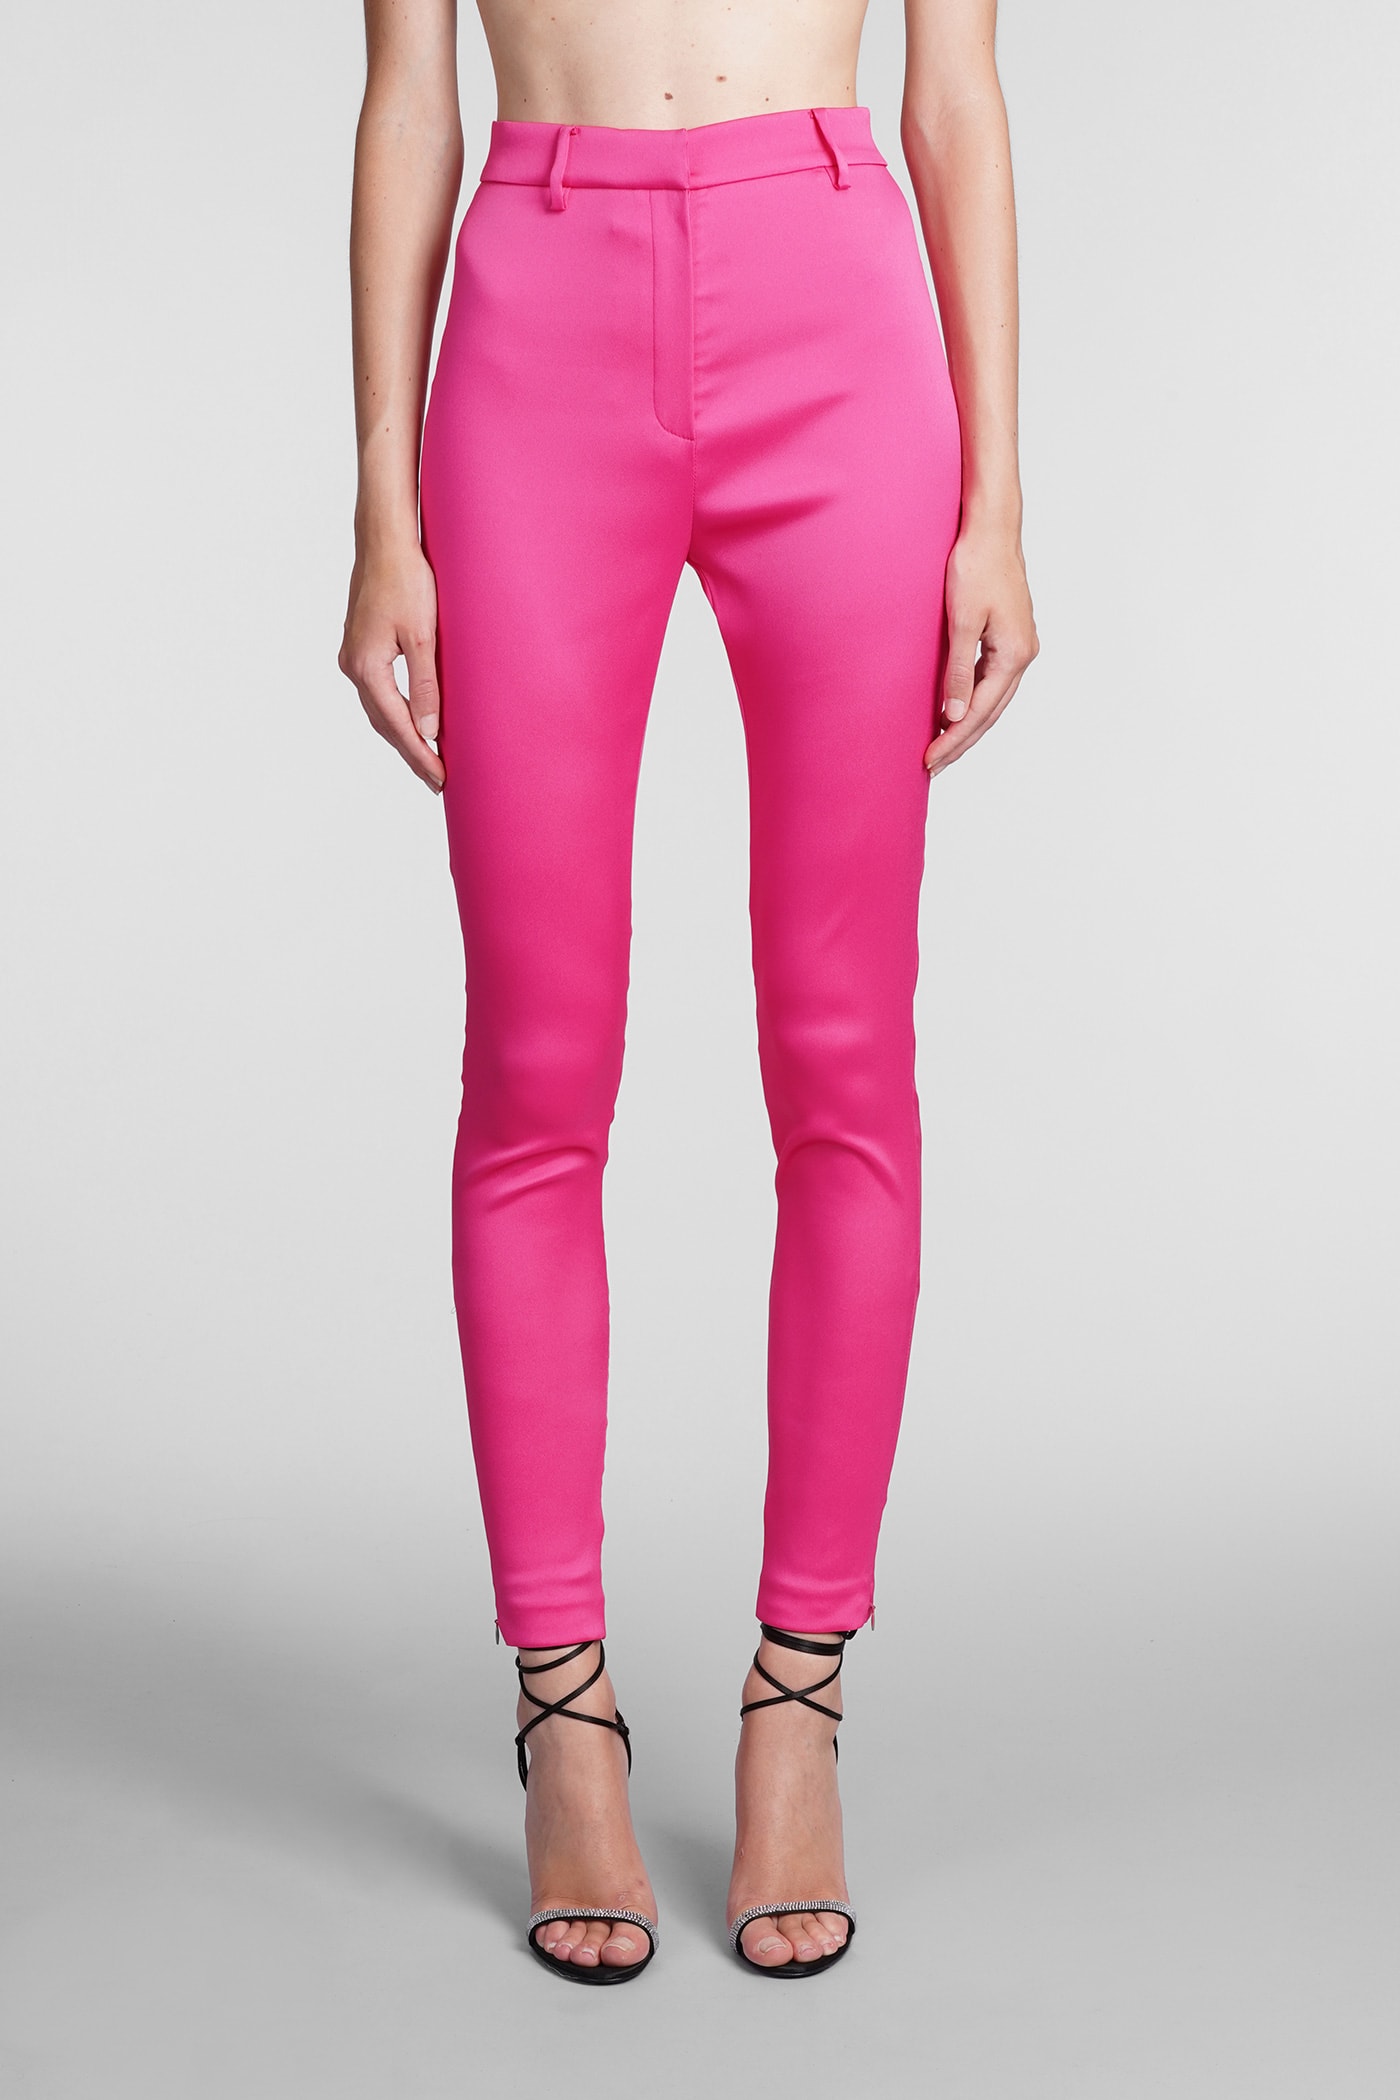 Magda Butrym Pants In Rose-pink Synthetic Fibers